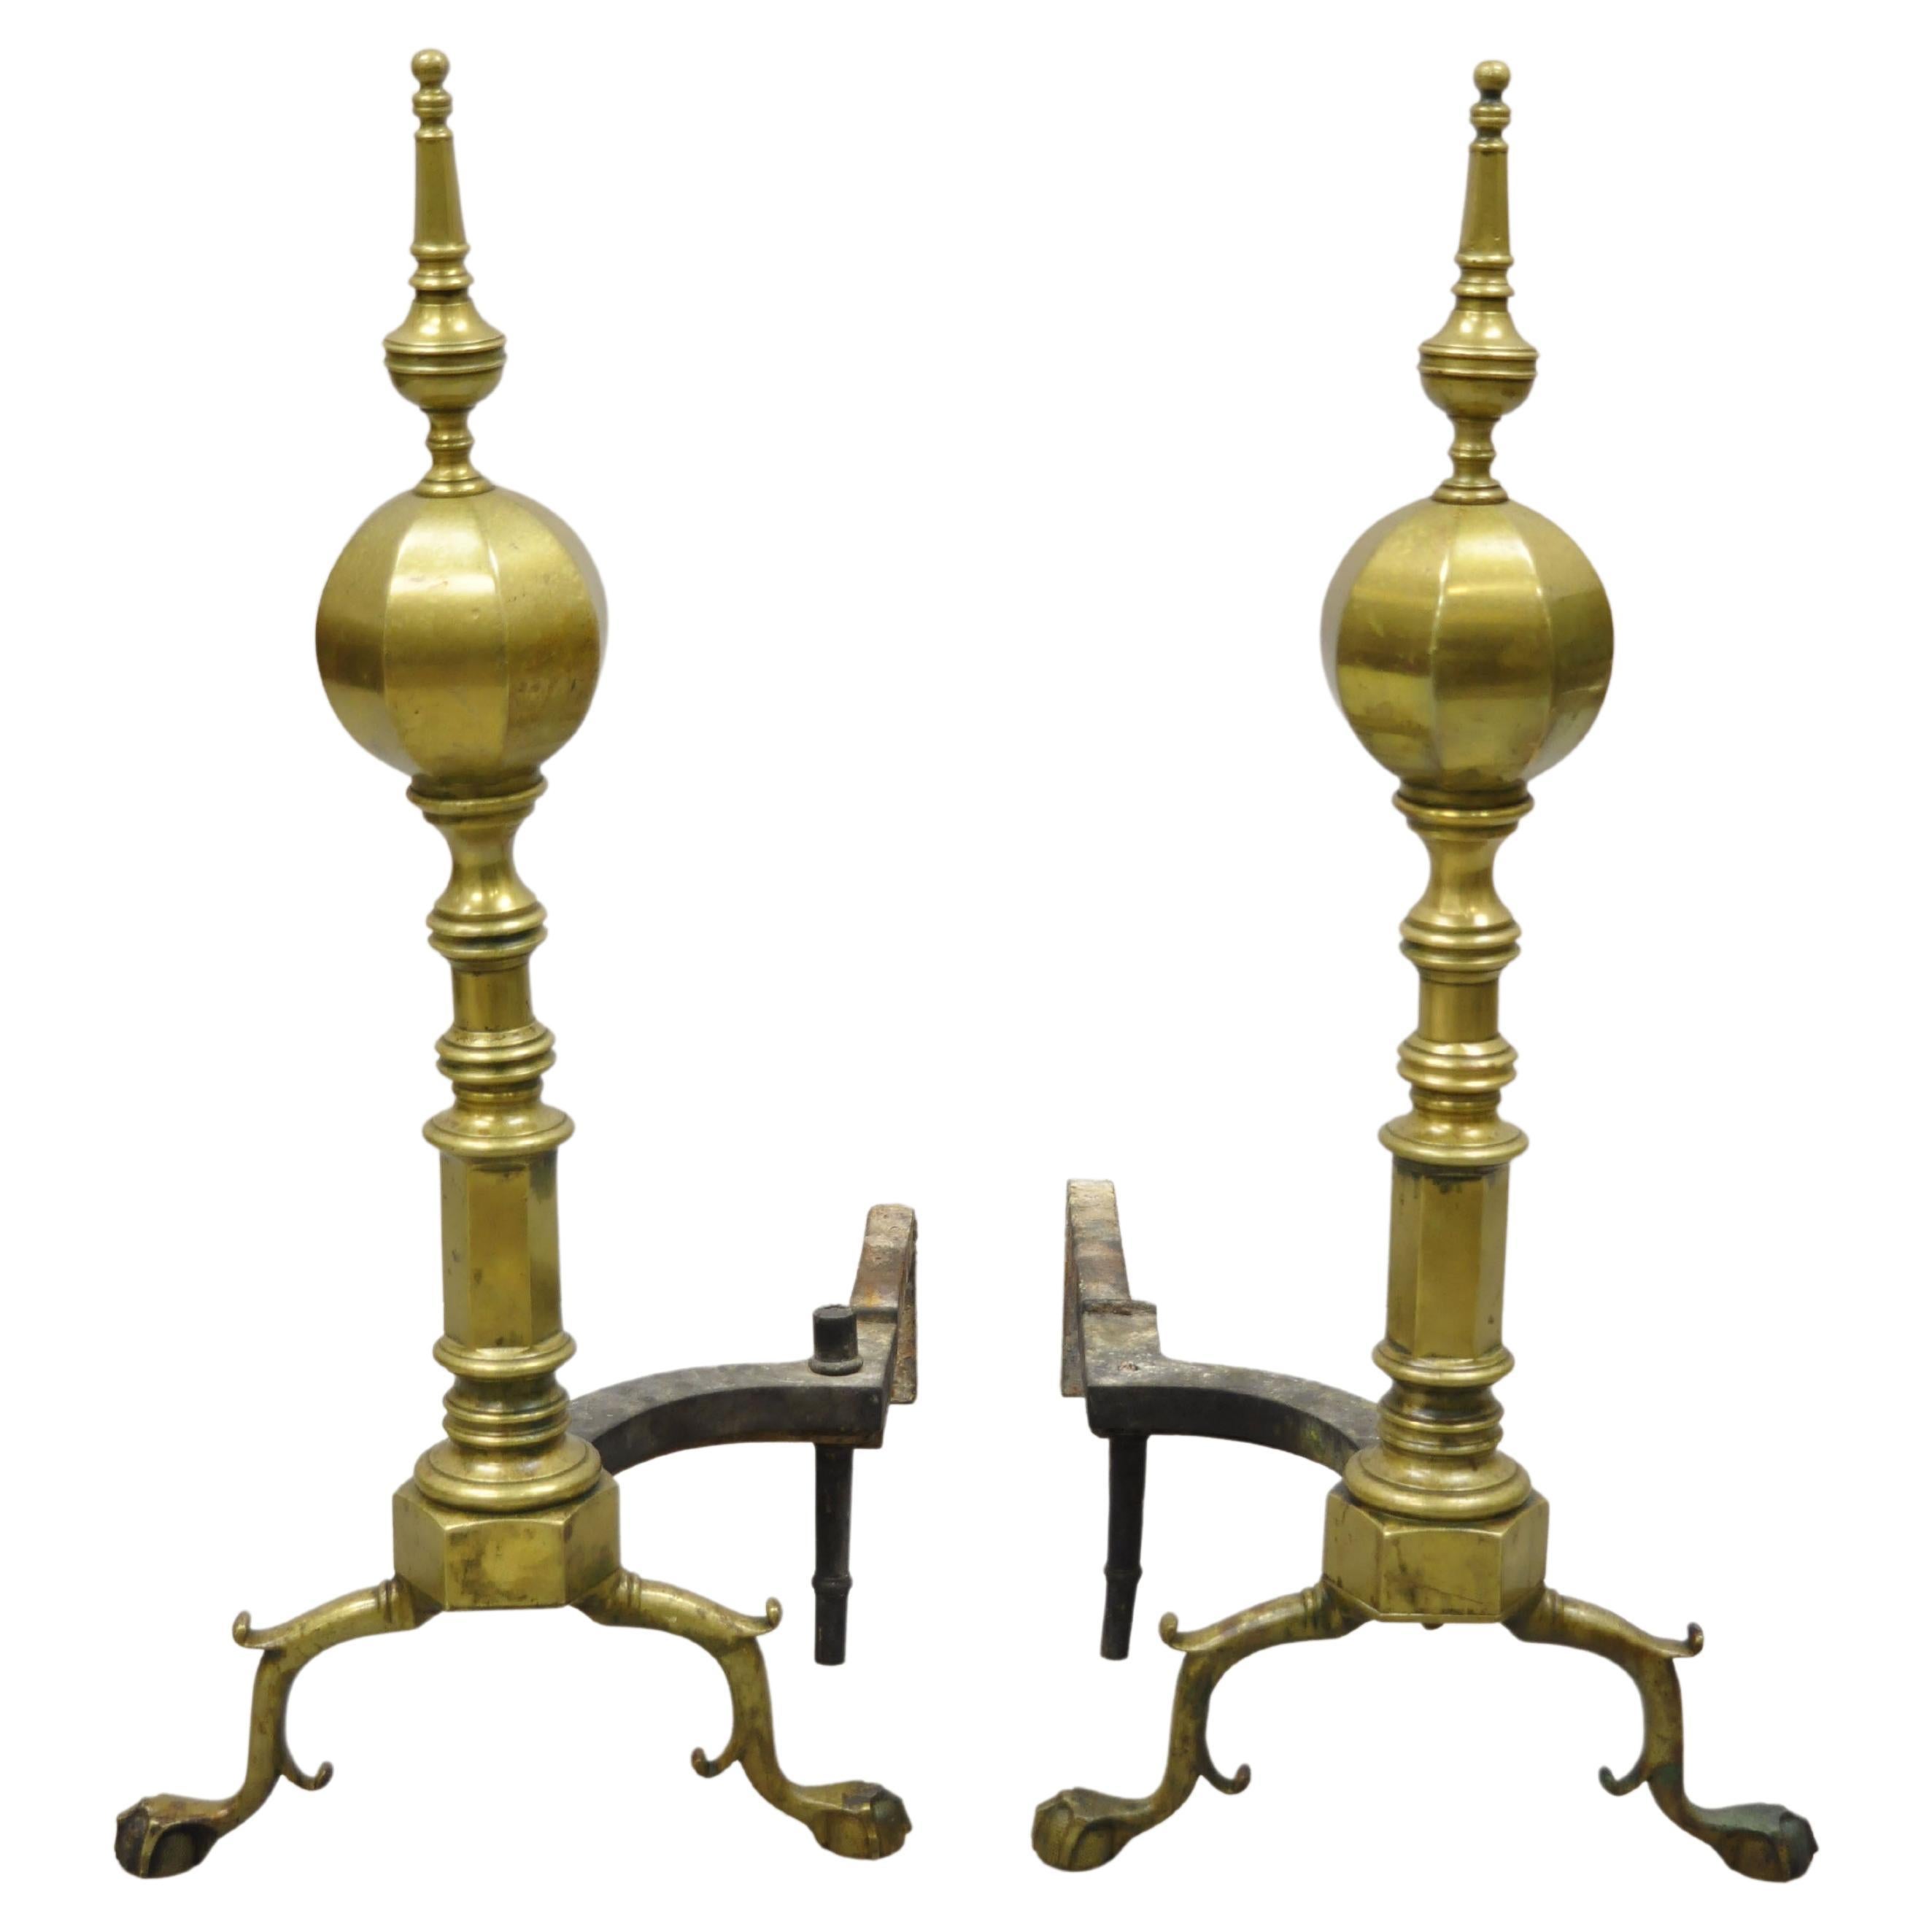 Antique Federal Faceted Brass Cannonball Branch Feet Cast Iron Andirons, a Pair For Sale